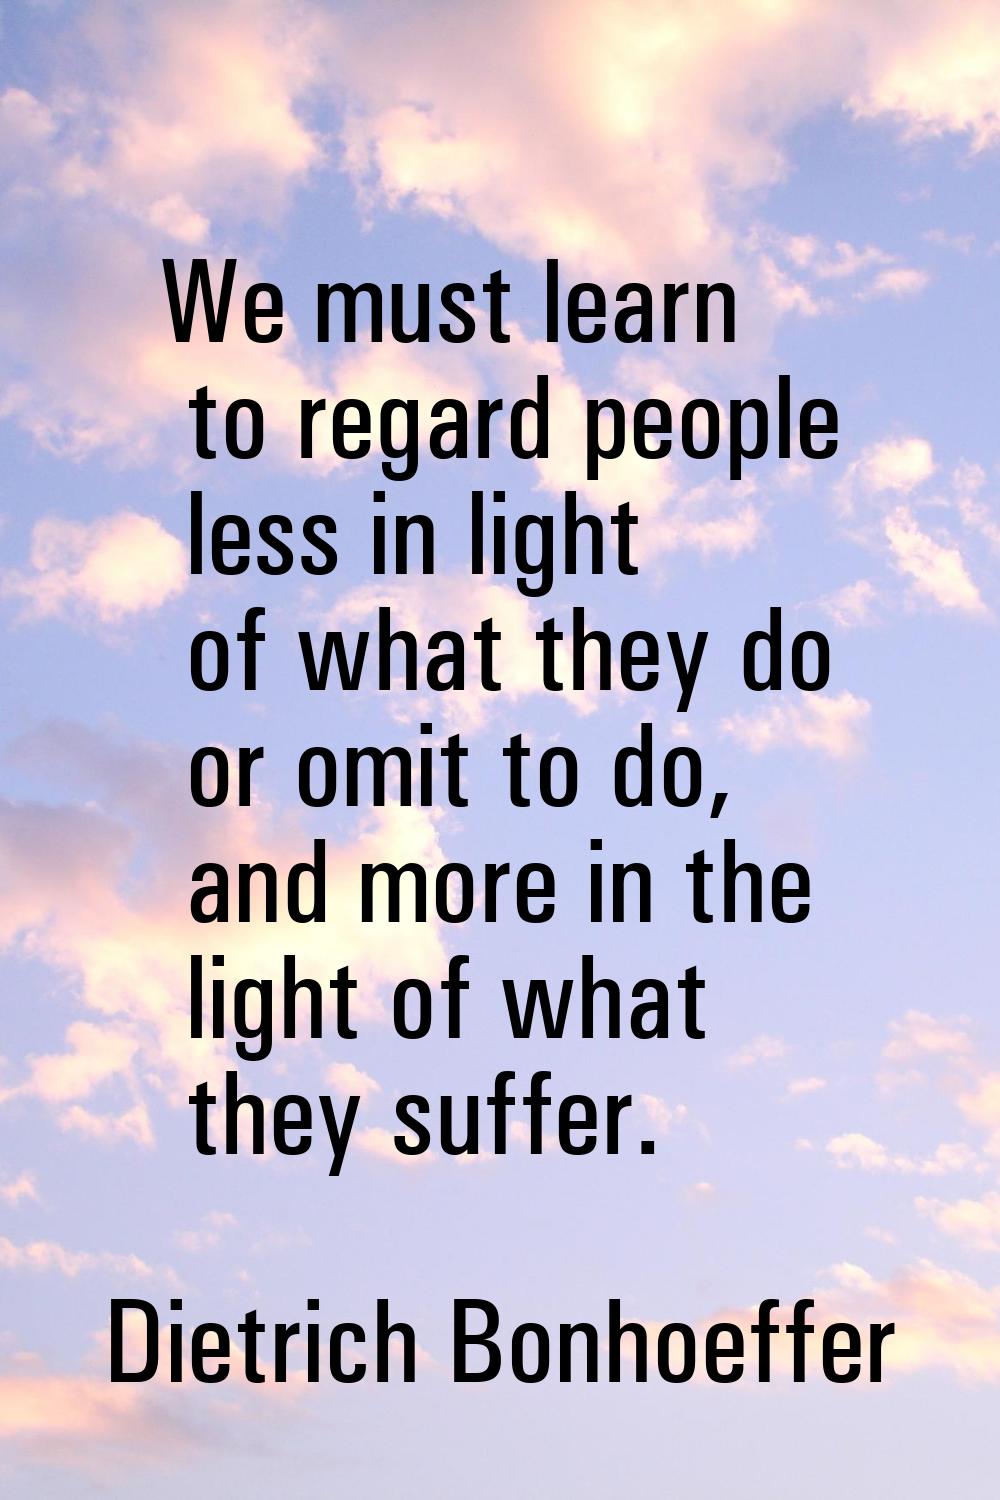 We must learn to regard people less in light of what they do or omit to do, and more in the light o